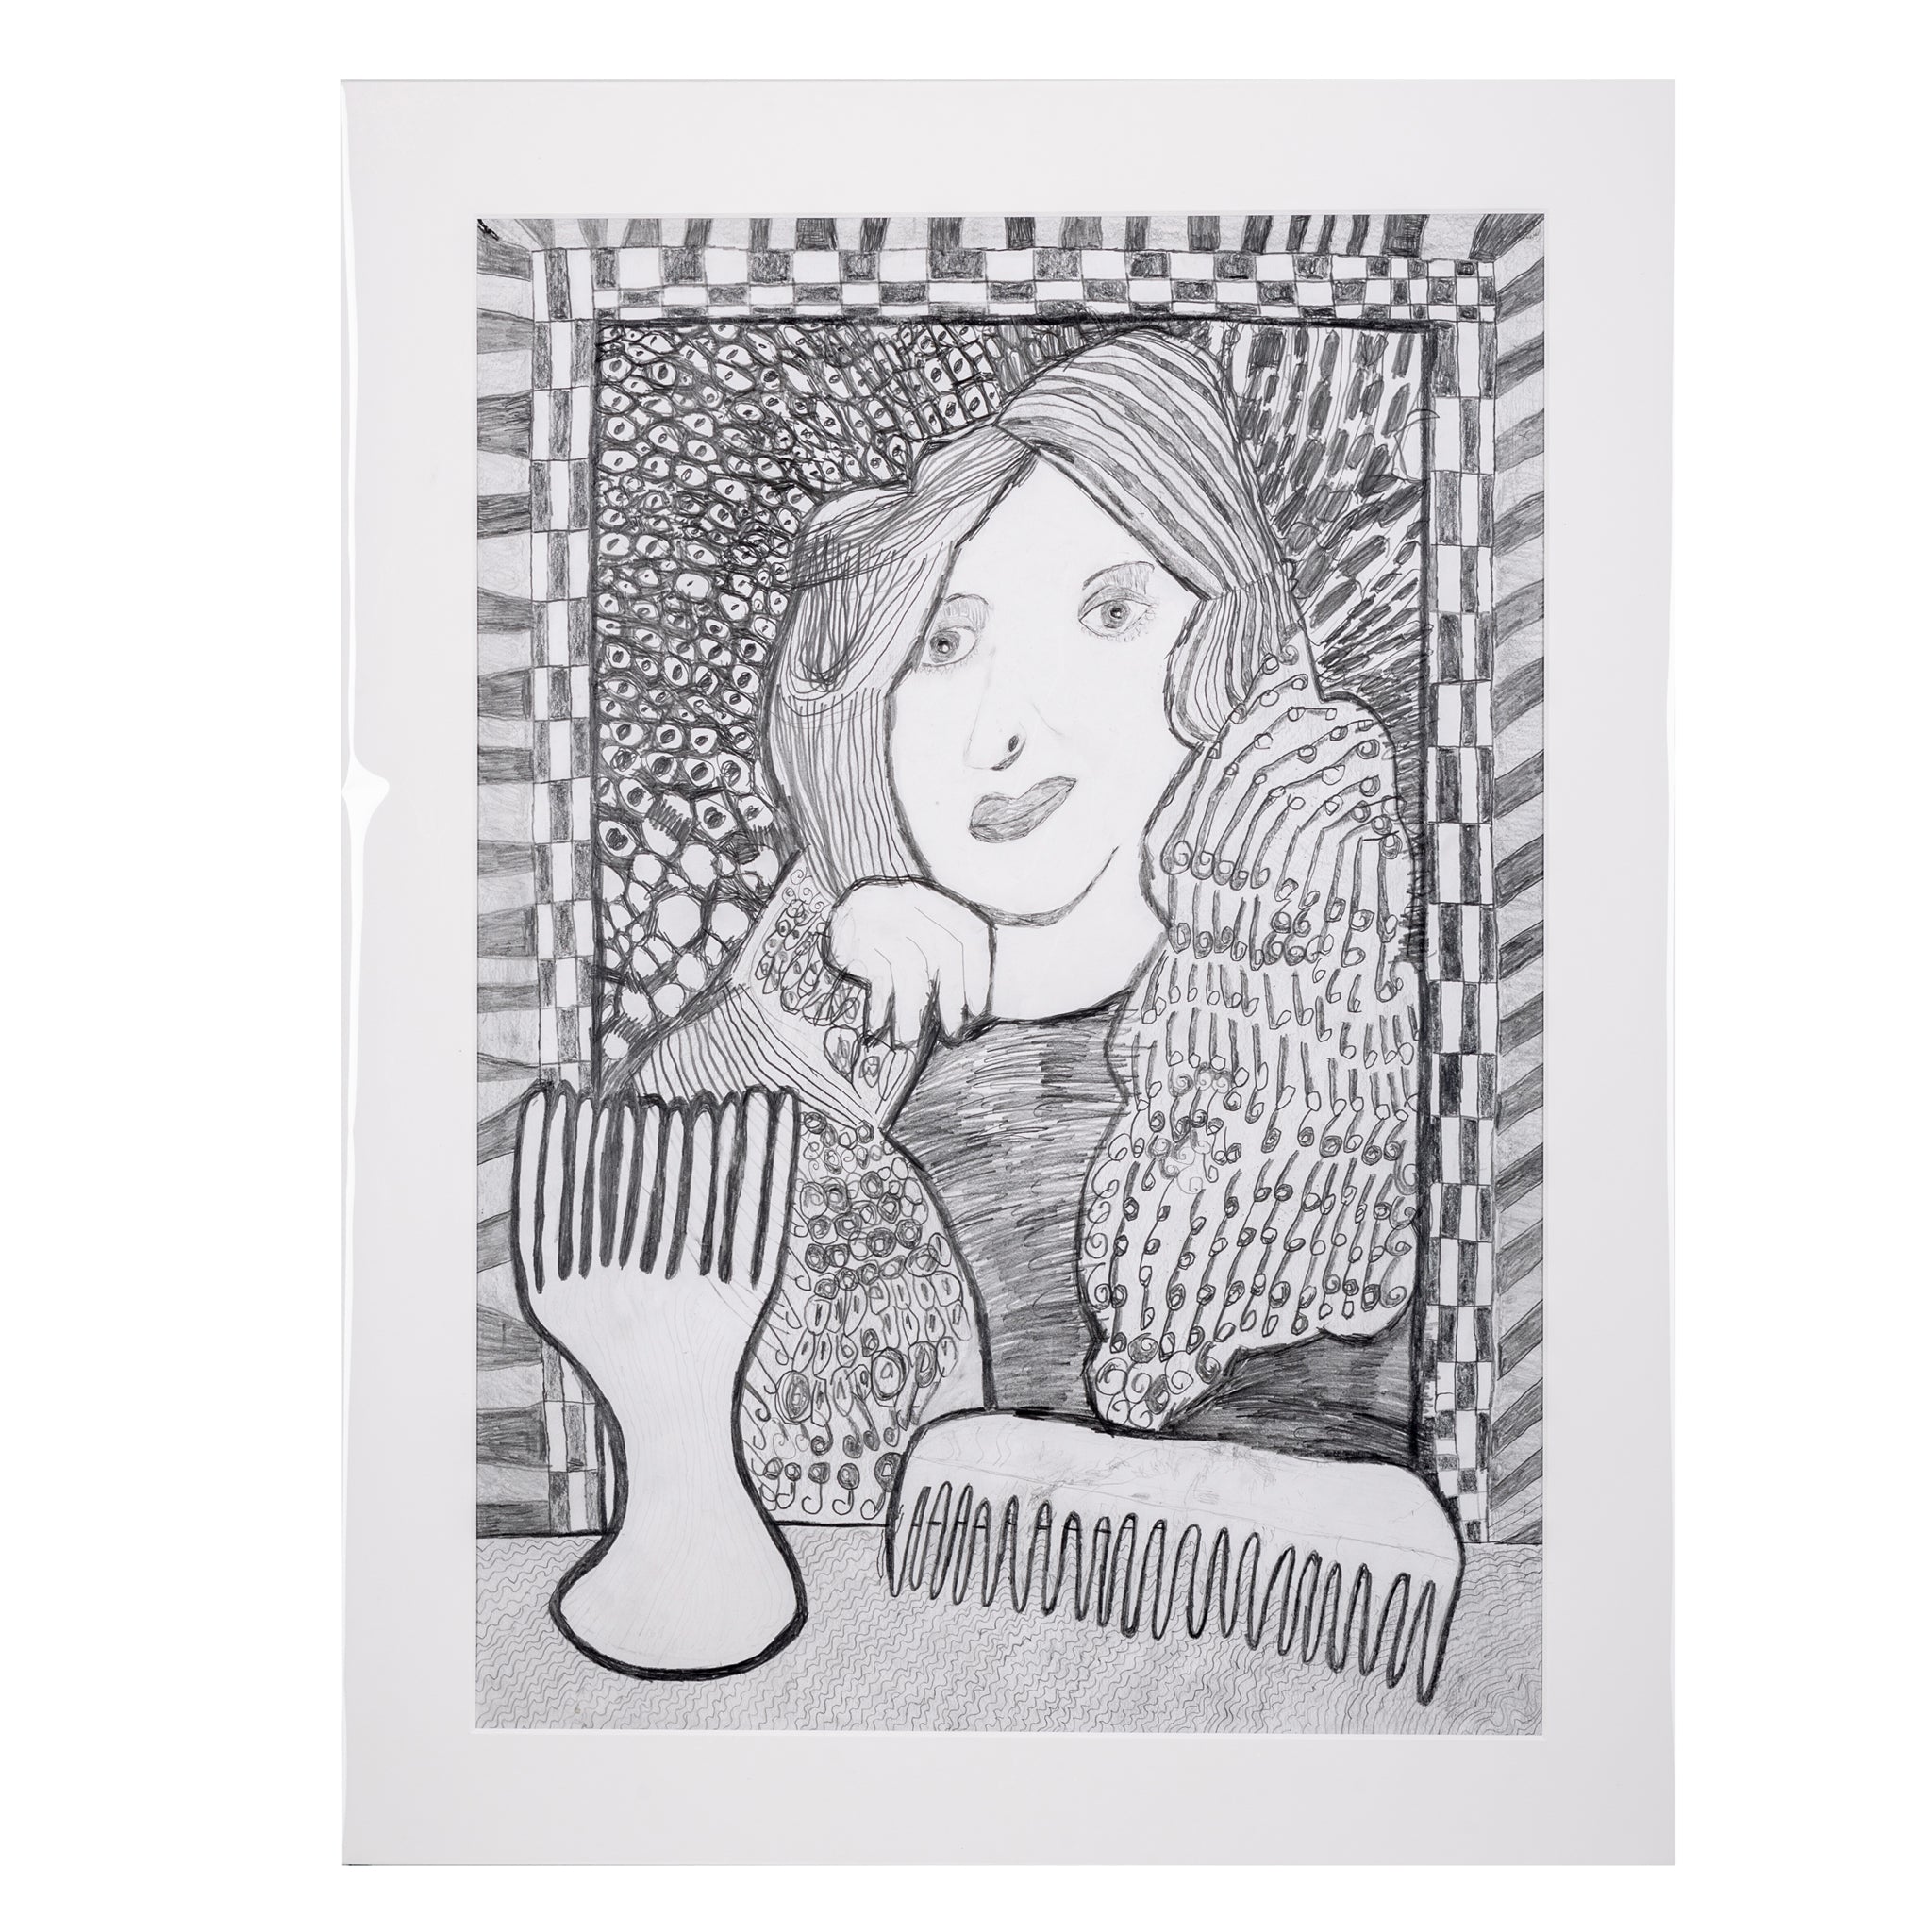 A hand drawn picture in pencil of a woman in front of a mirror with two hair brushes